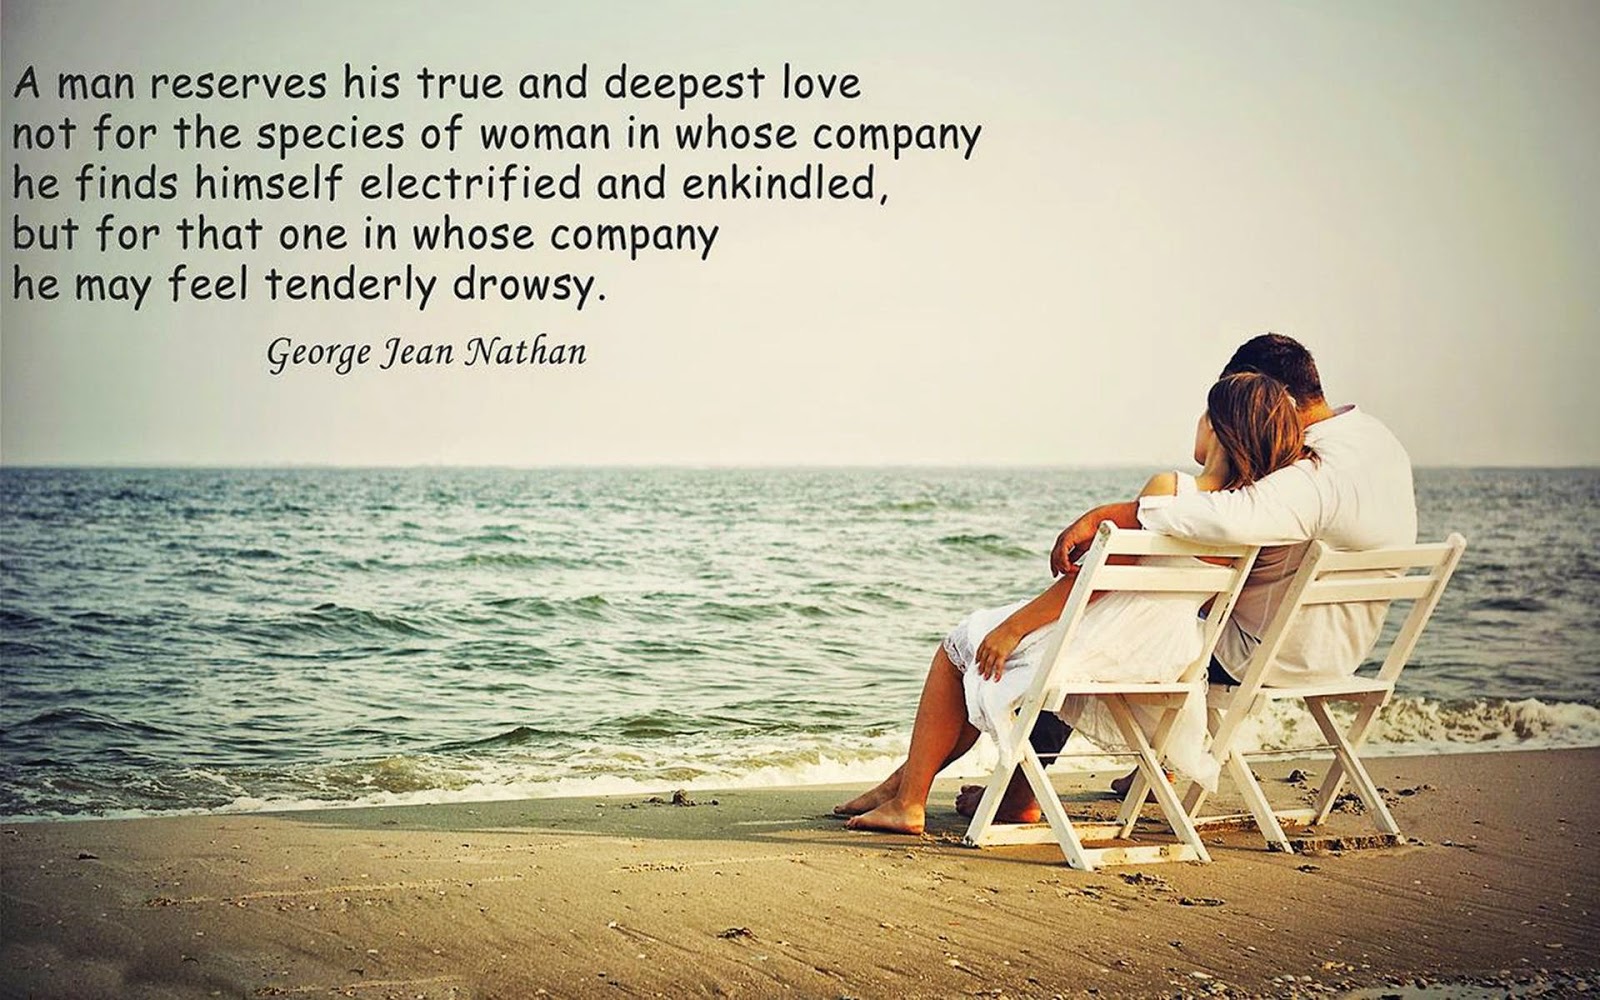 A man reserves his true and deepest love For